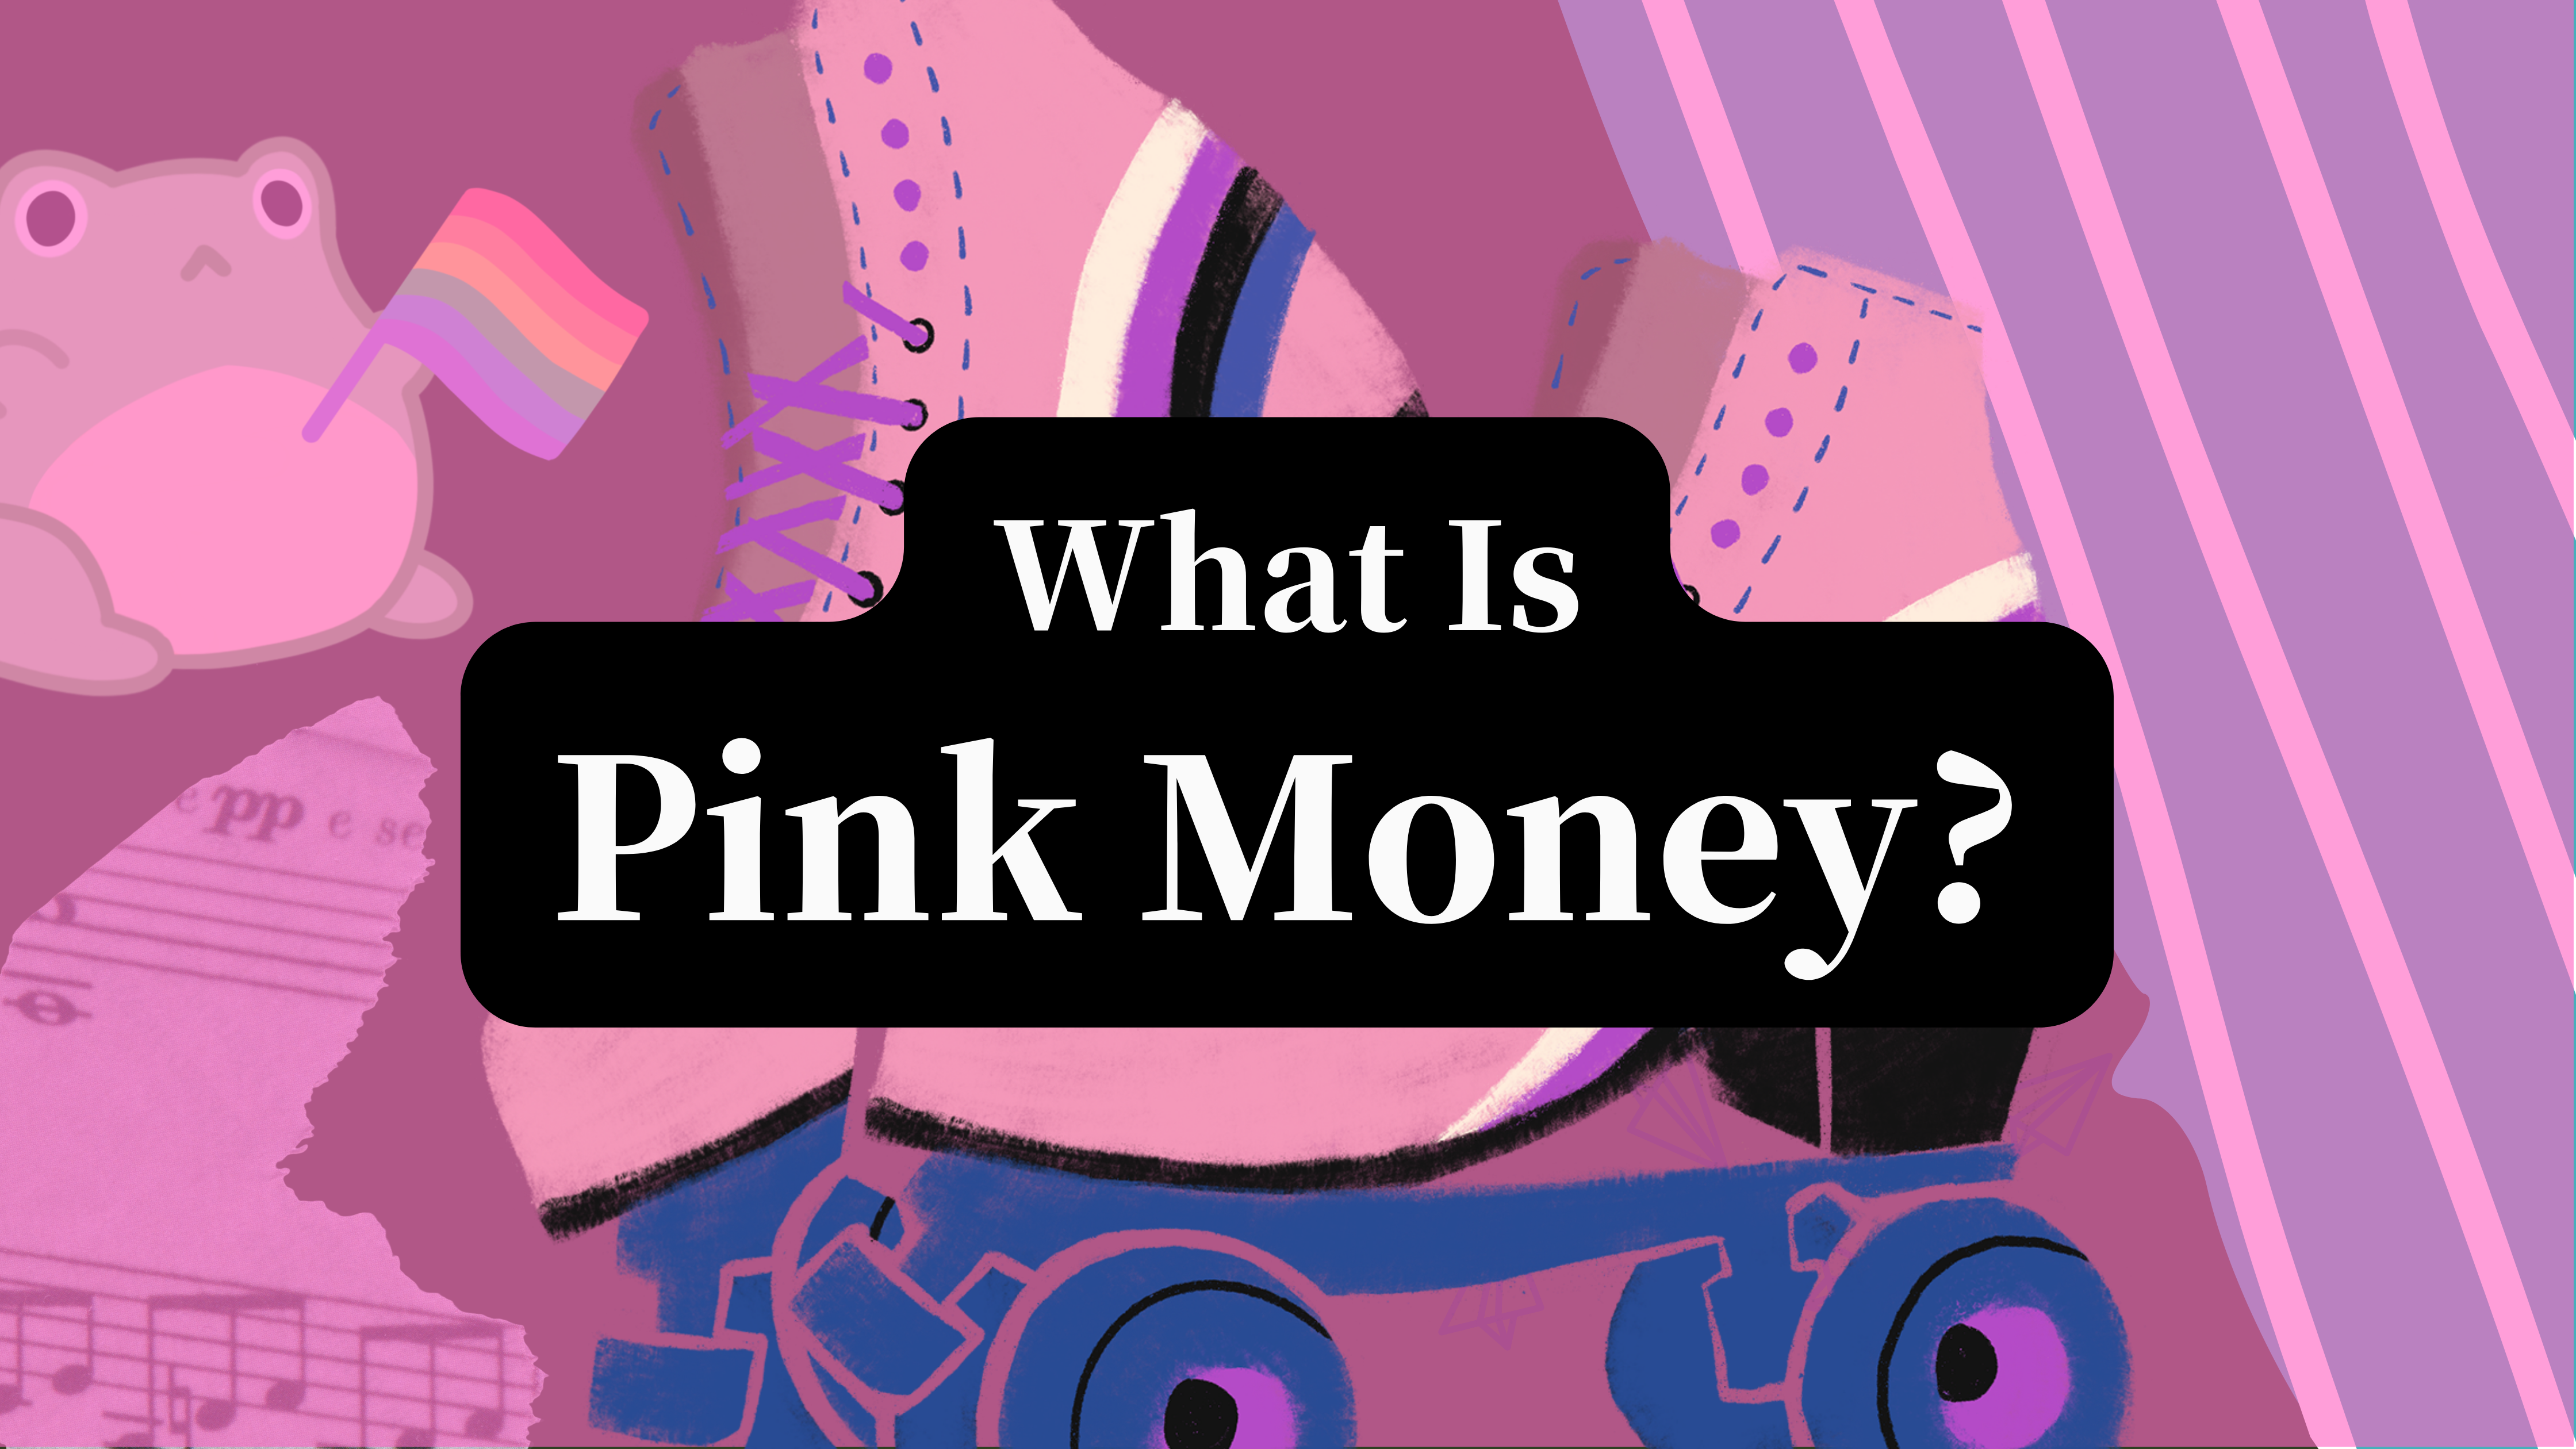 In The Pink: Meaning of the Slang Investing Term